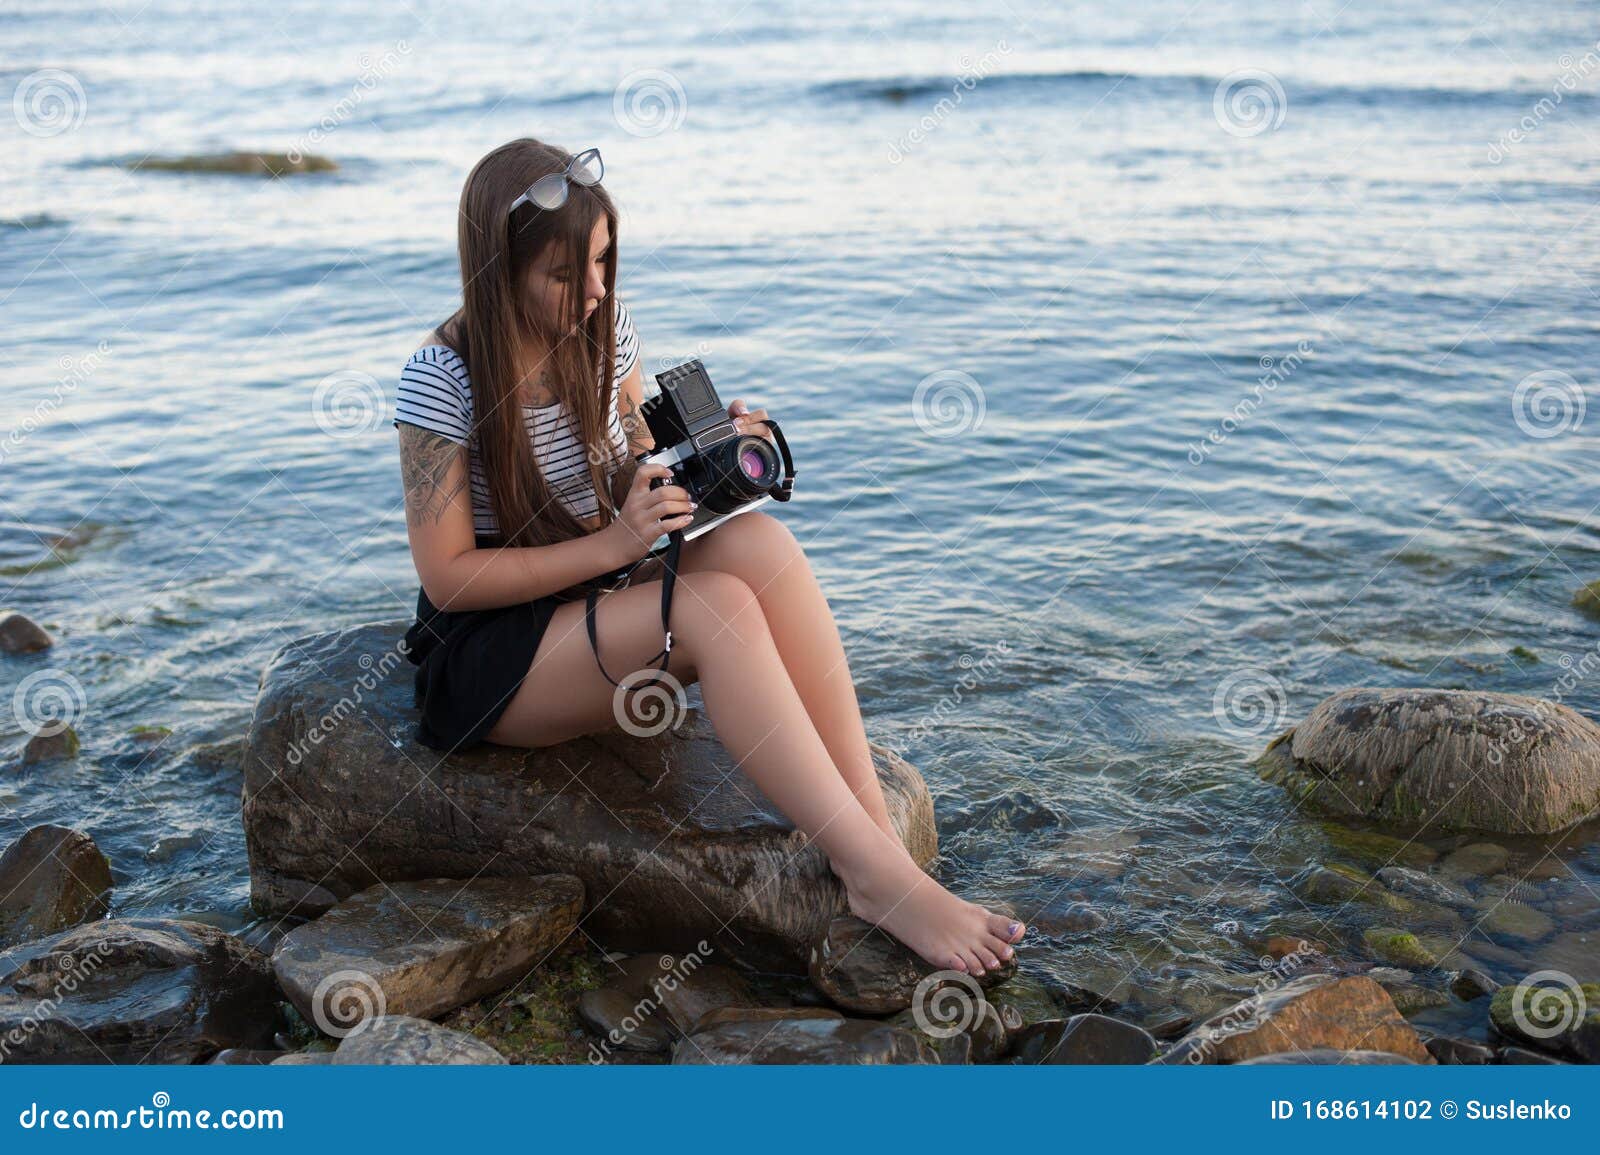 Sexiest Girl Behind A Camera Gets Herself Off